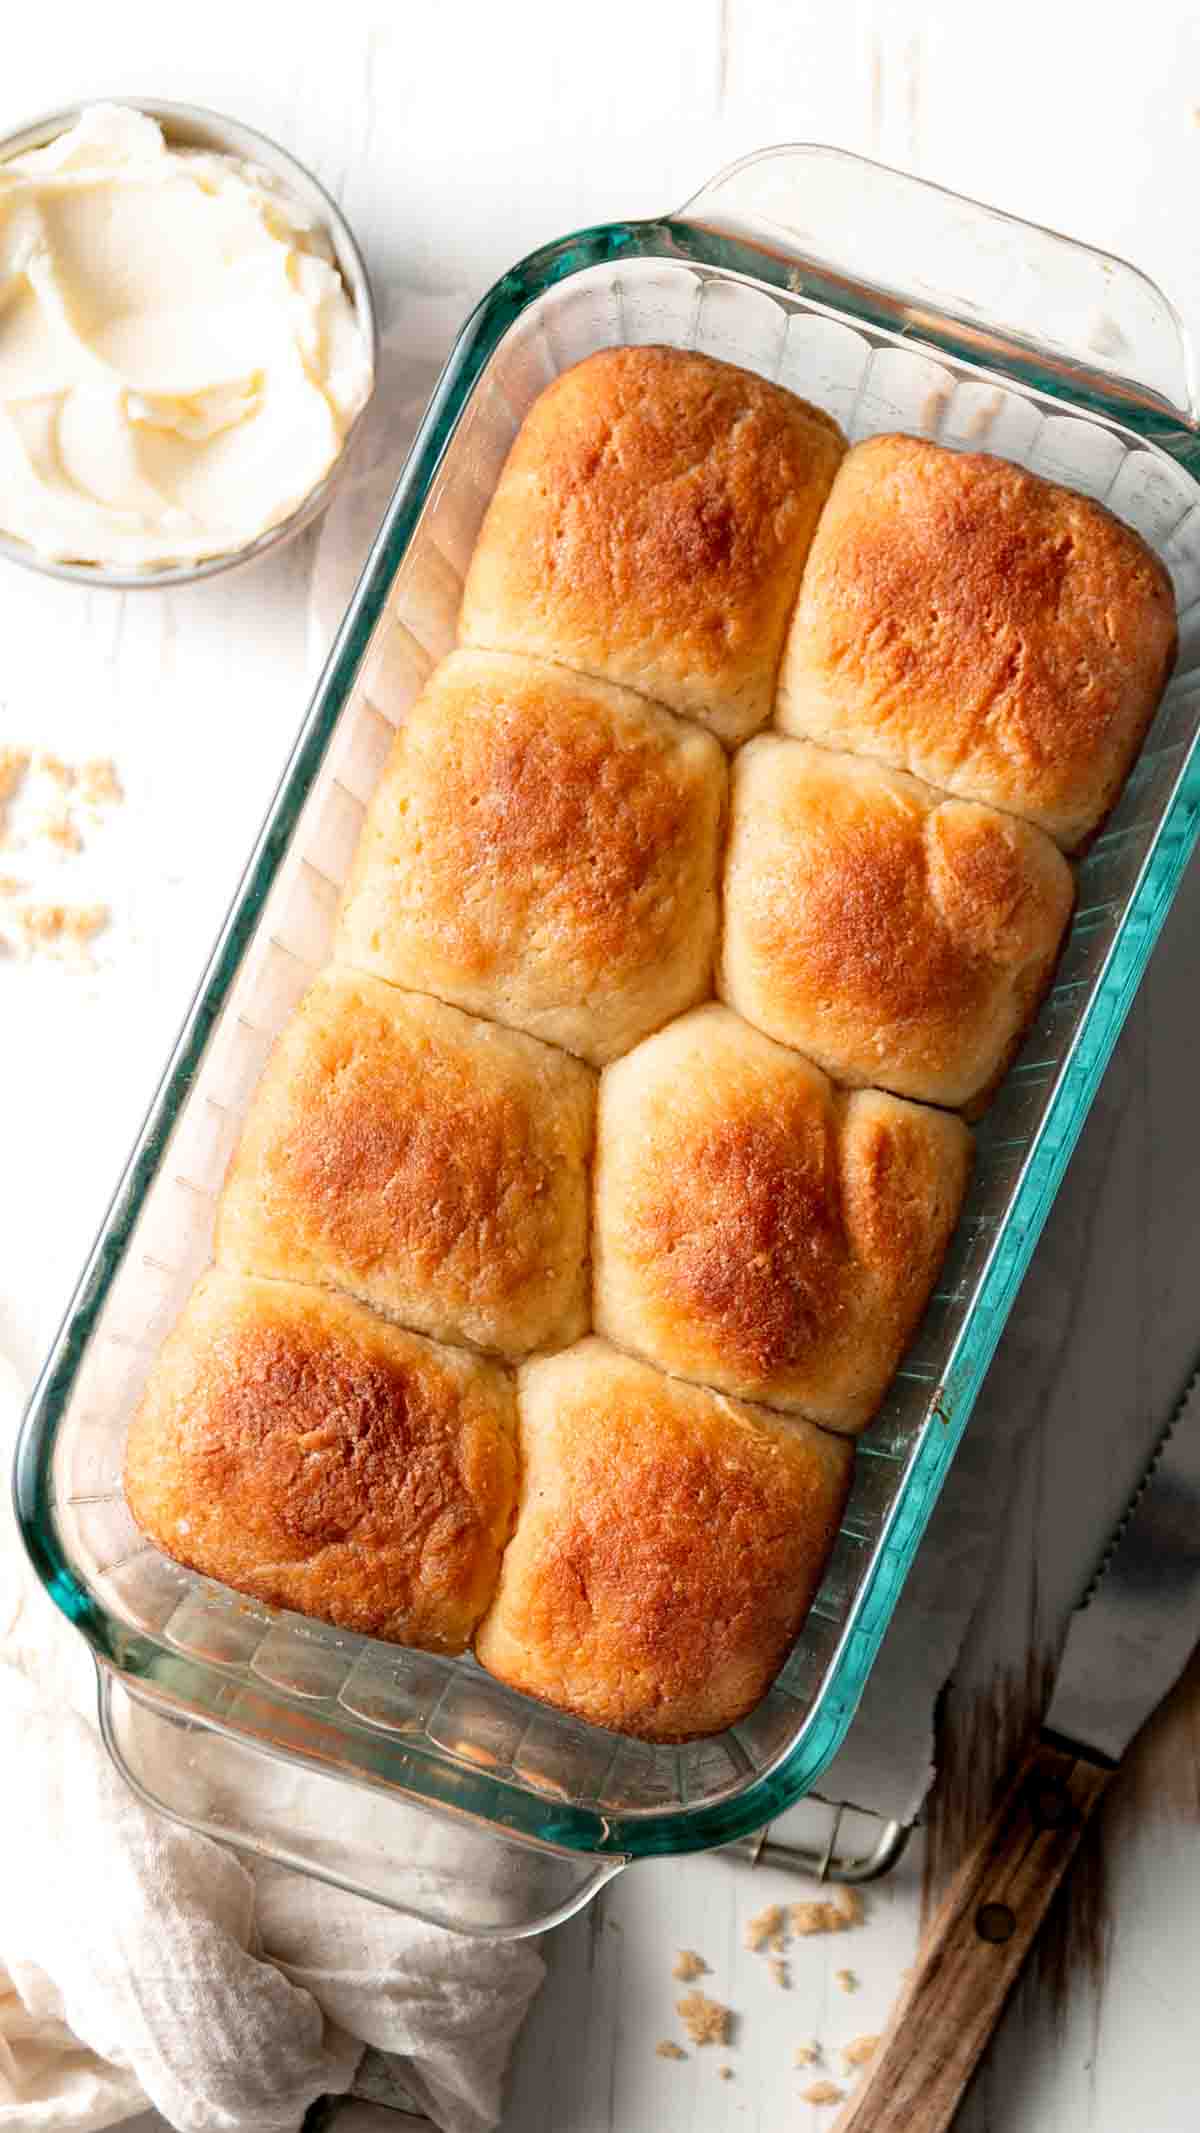 Eight rolls in a regular sized pyrex loaf pan.